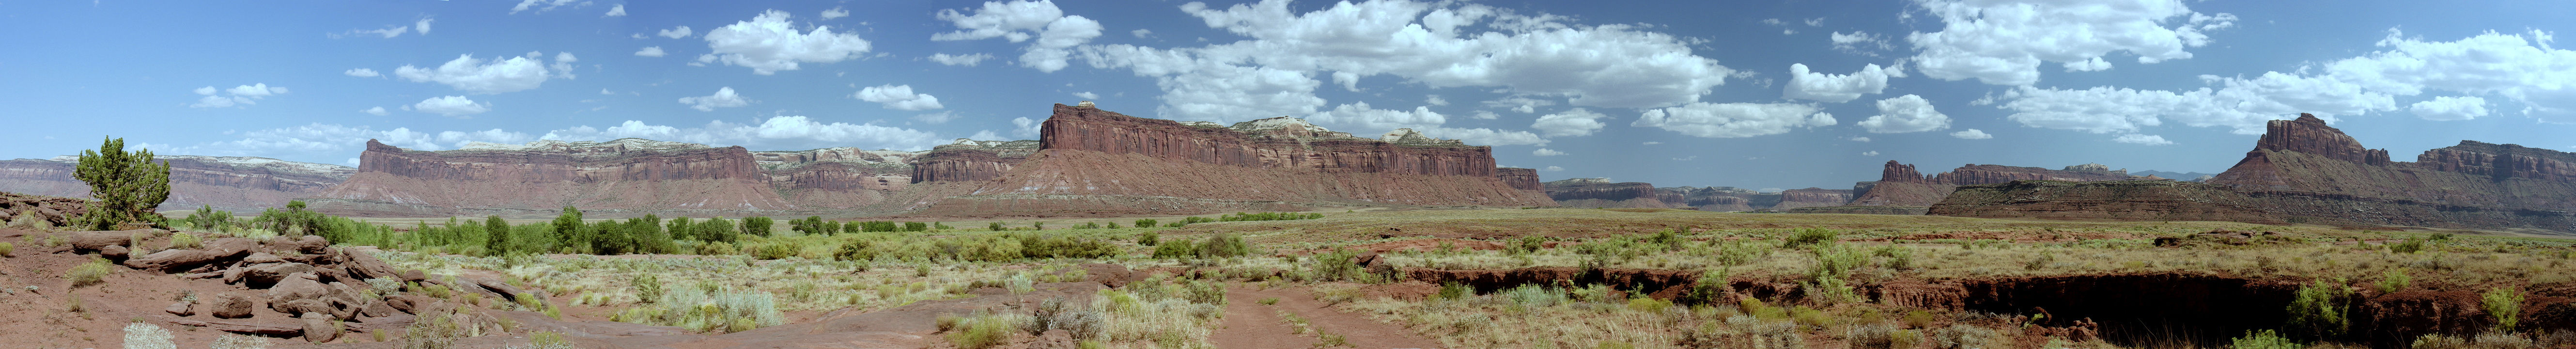 South of Moab